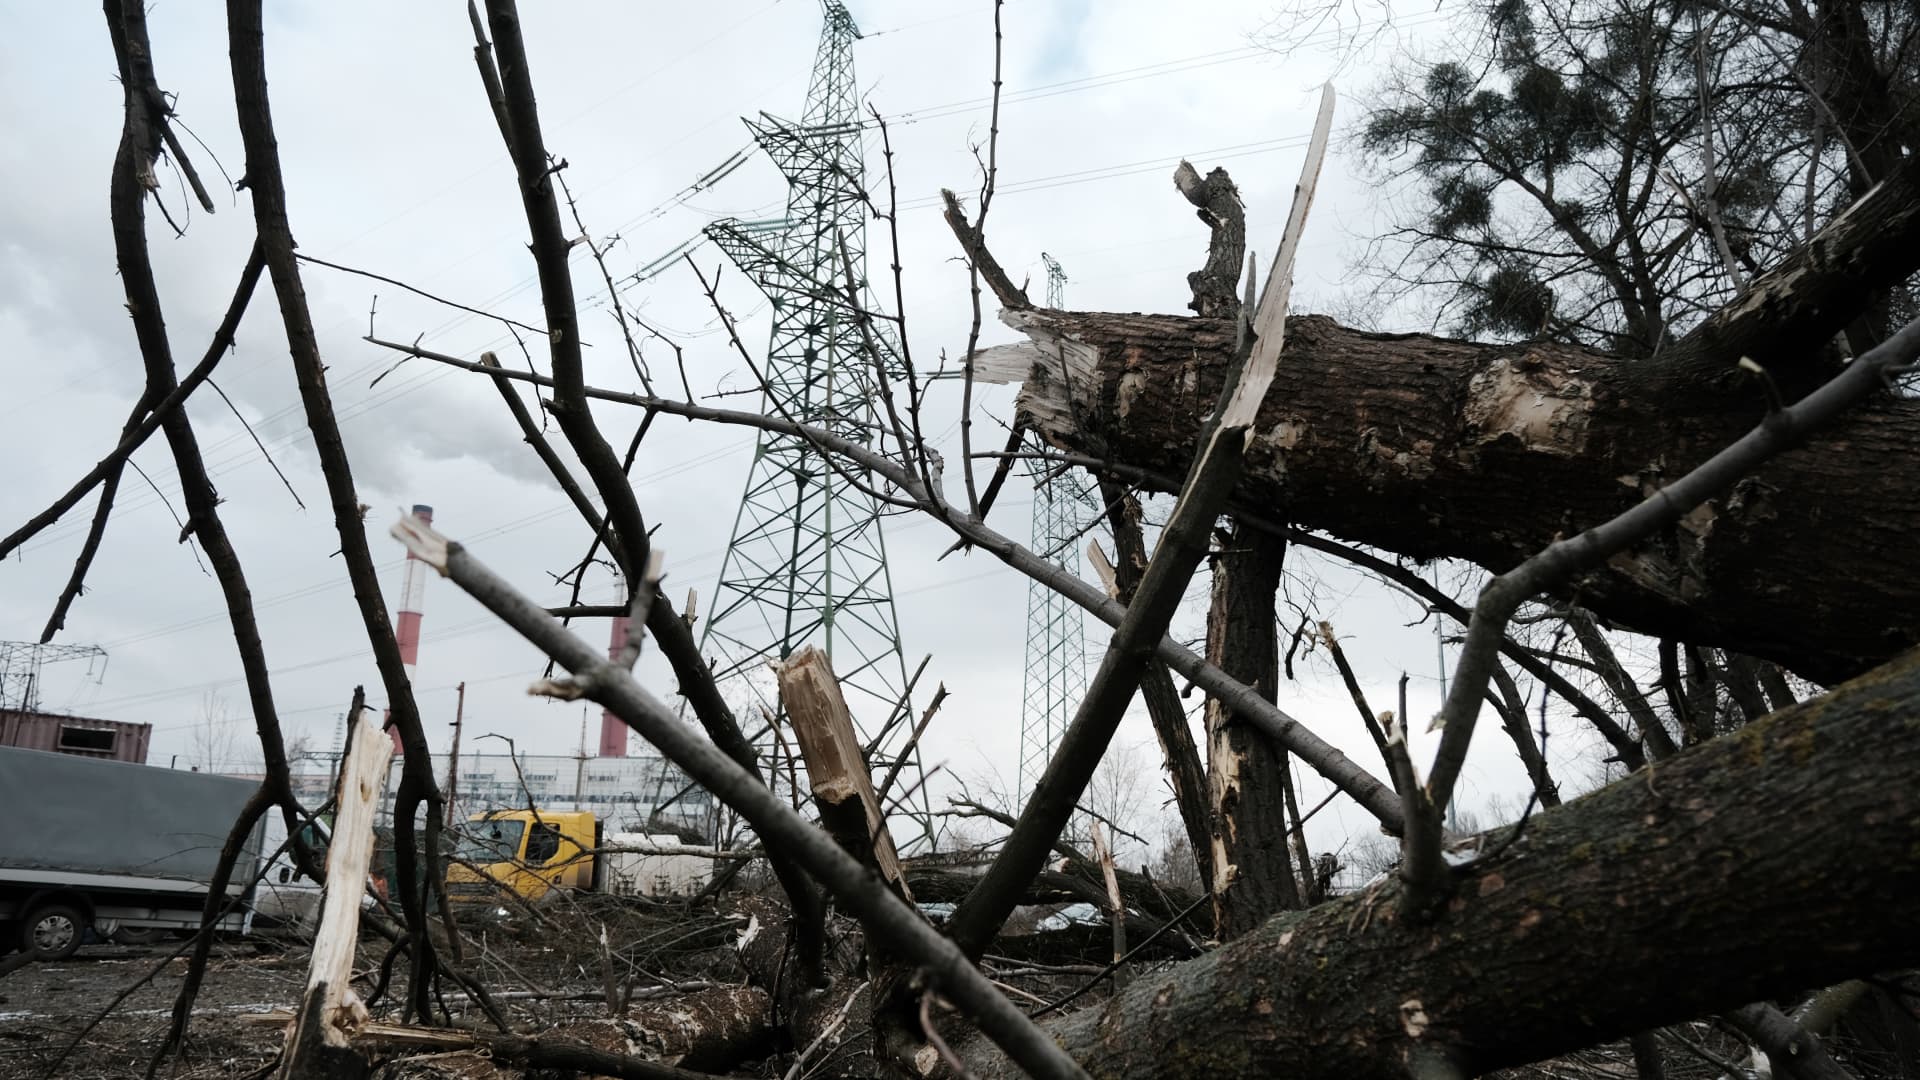 Broken tree limbs and other debris litter the ground at an industrial area in Kyiv following a morning missile strike that left one person dead and two wounded on January 26, 2023 in Kyiv, Ukraine.